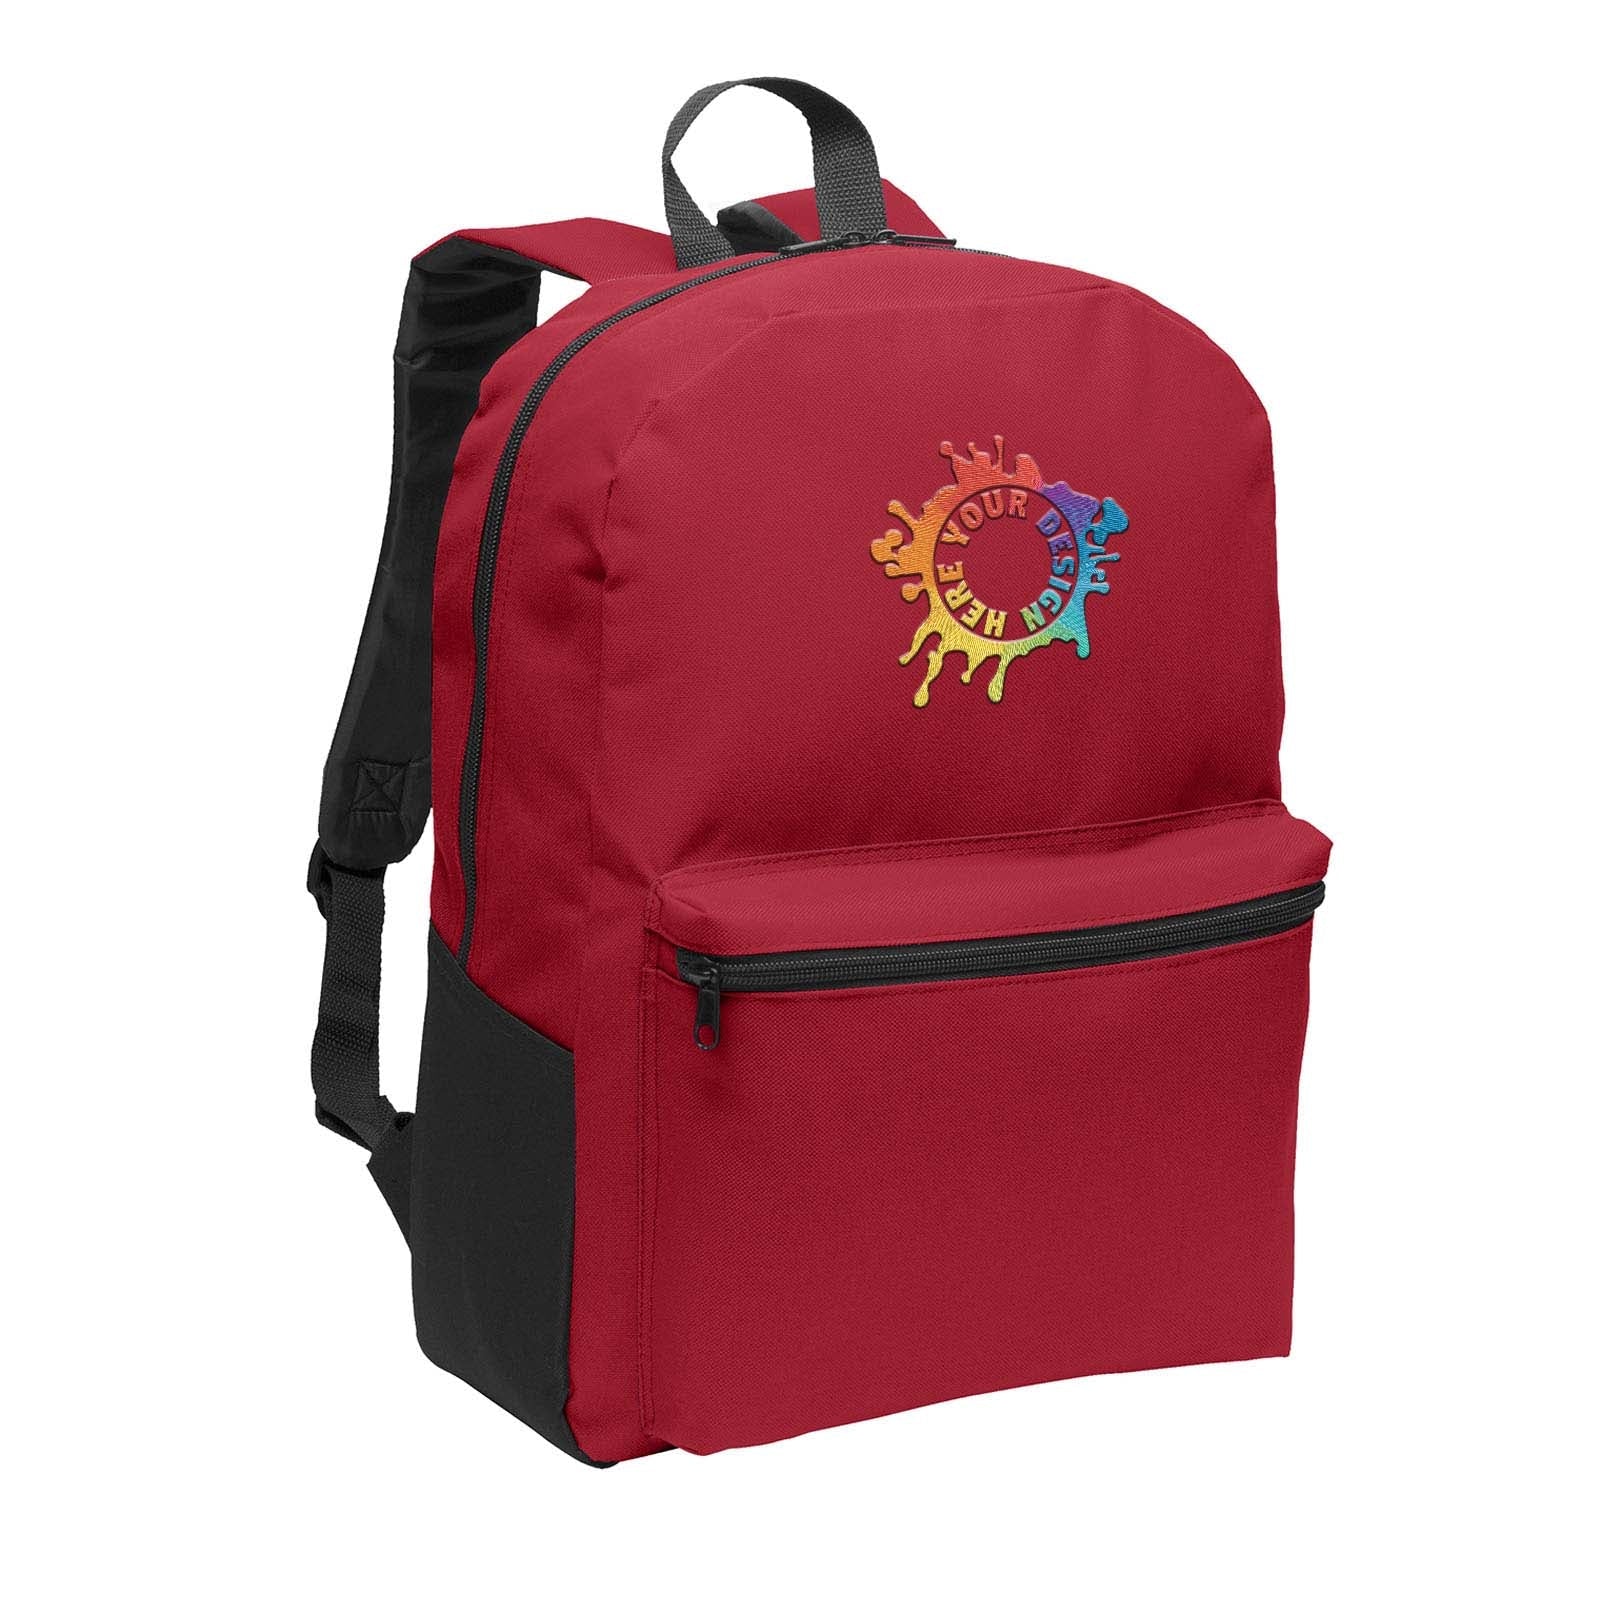 Port Authority® Value Backpack Embroidery - Mato & Hash